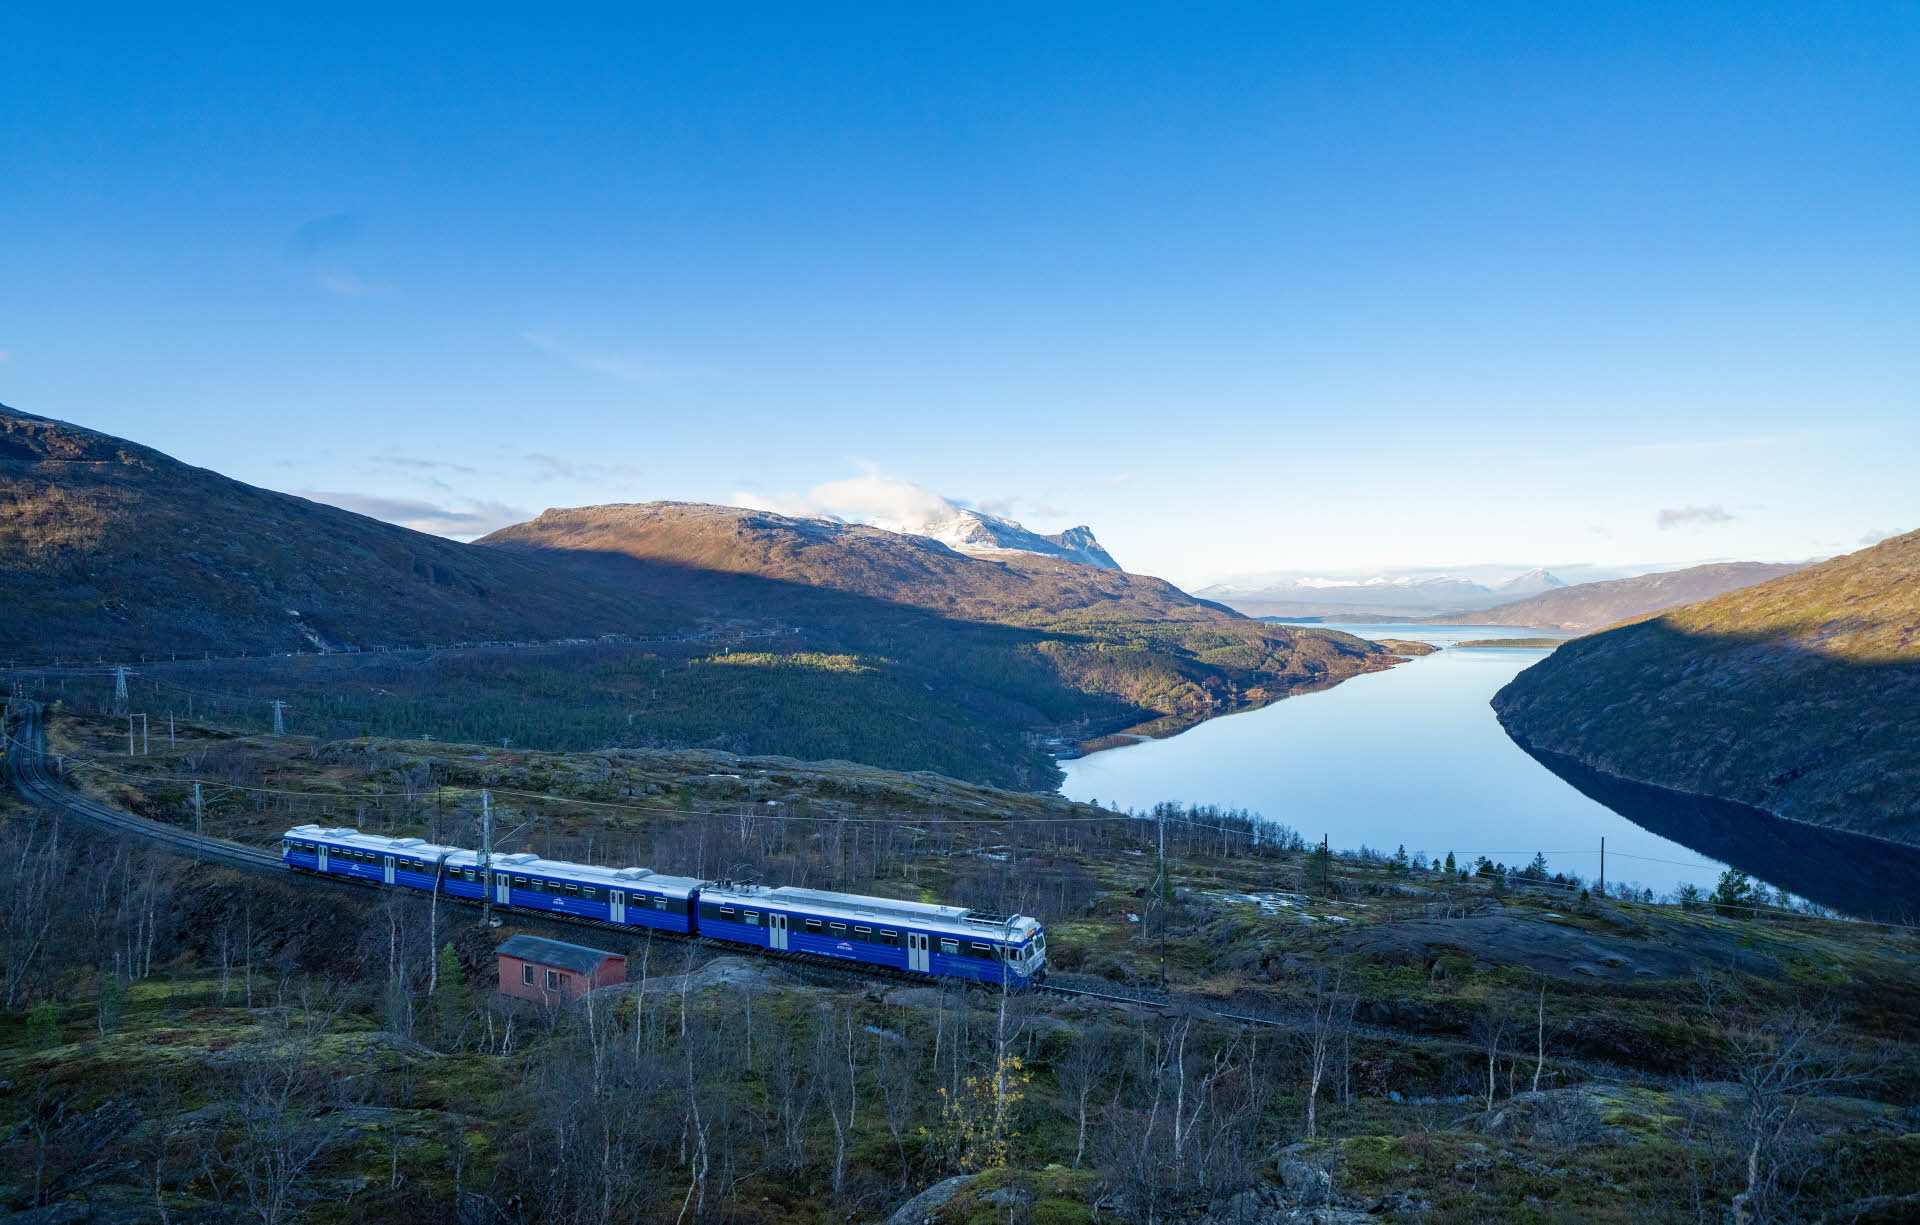 A blue train by a bare mountainside above a fjord